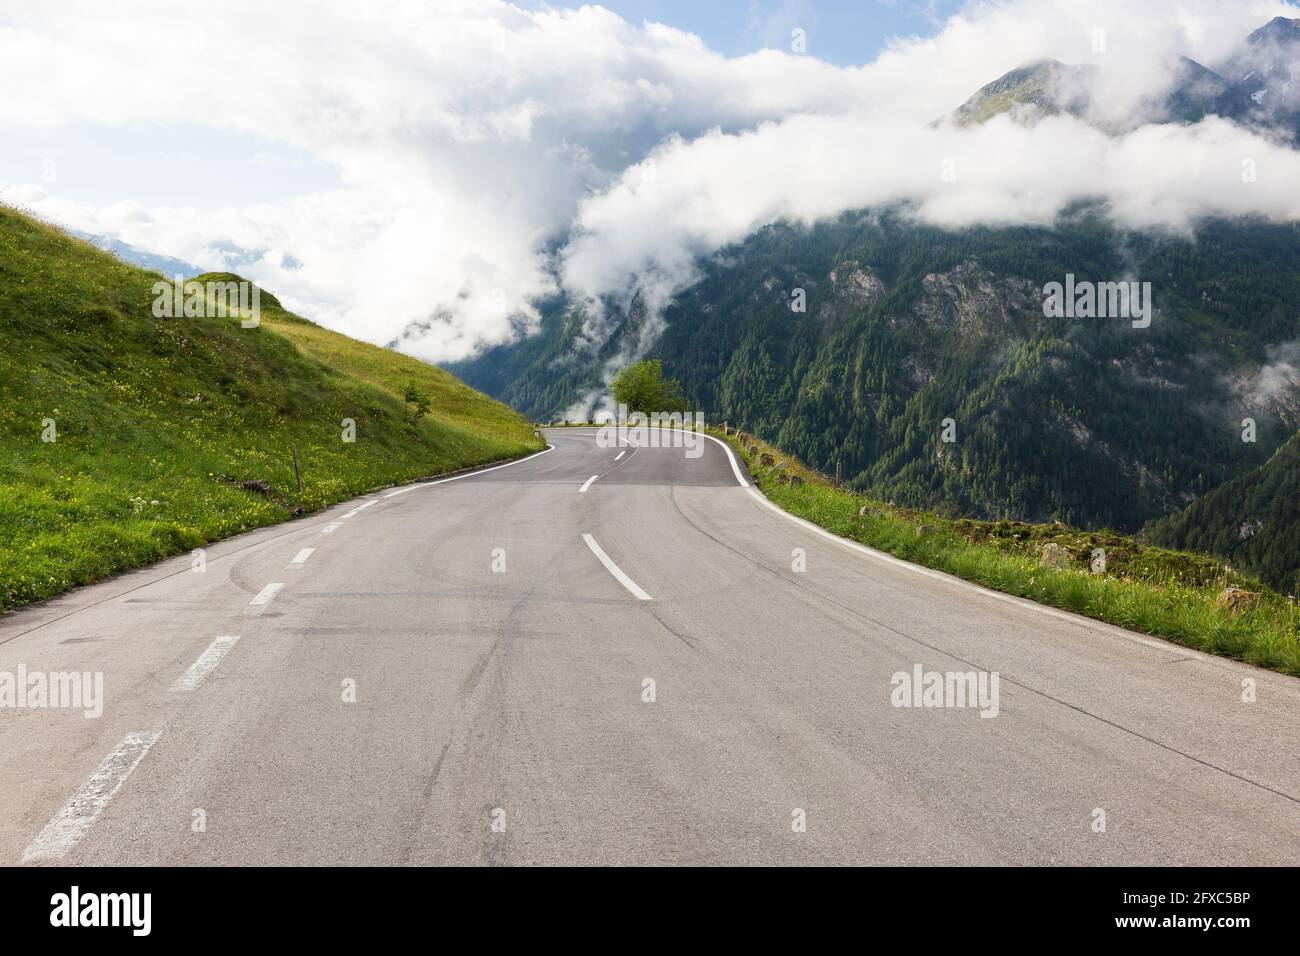 Austria, Carinthia, White fluffy clouds covering Alps seen from Grossglockner High Alpine Road Stock Photo